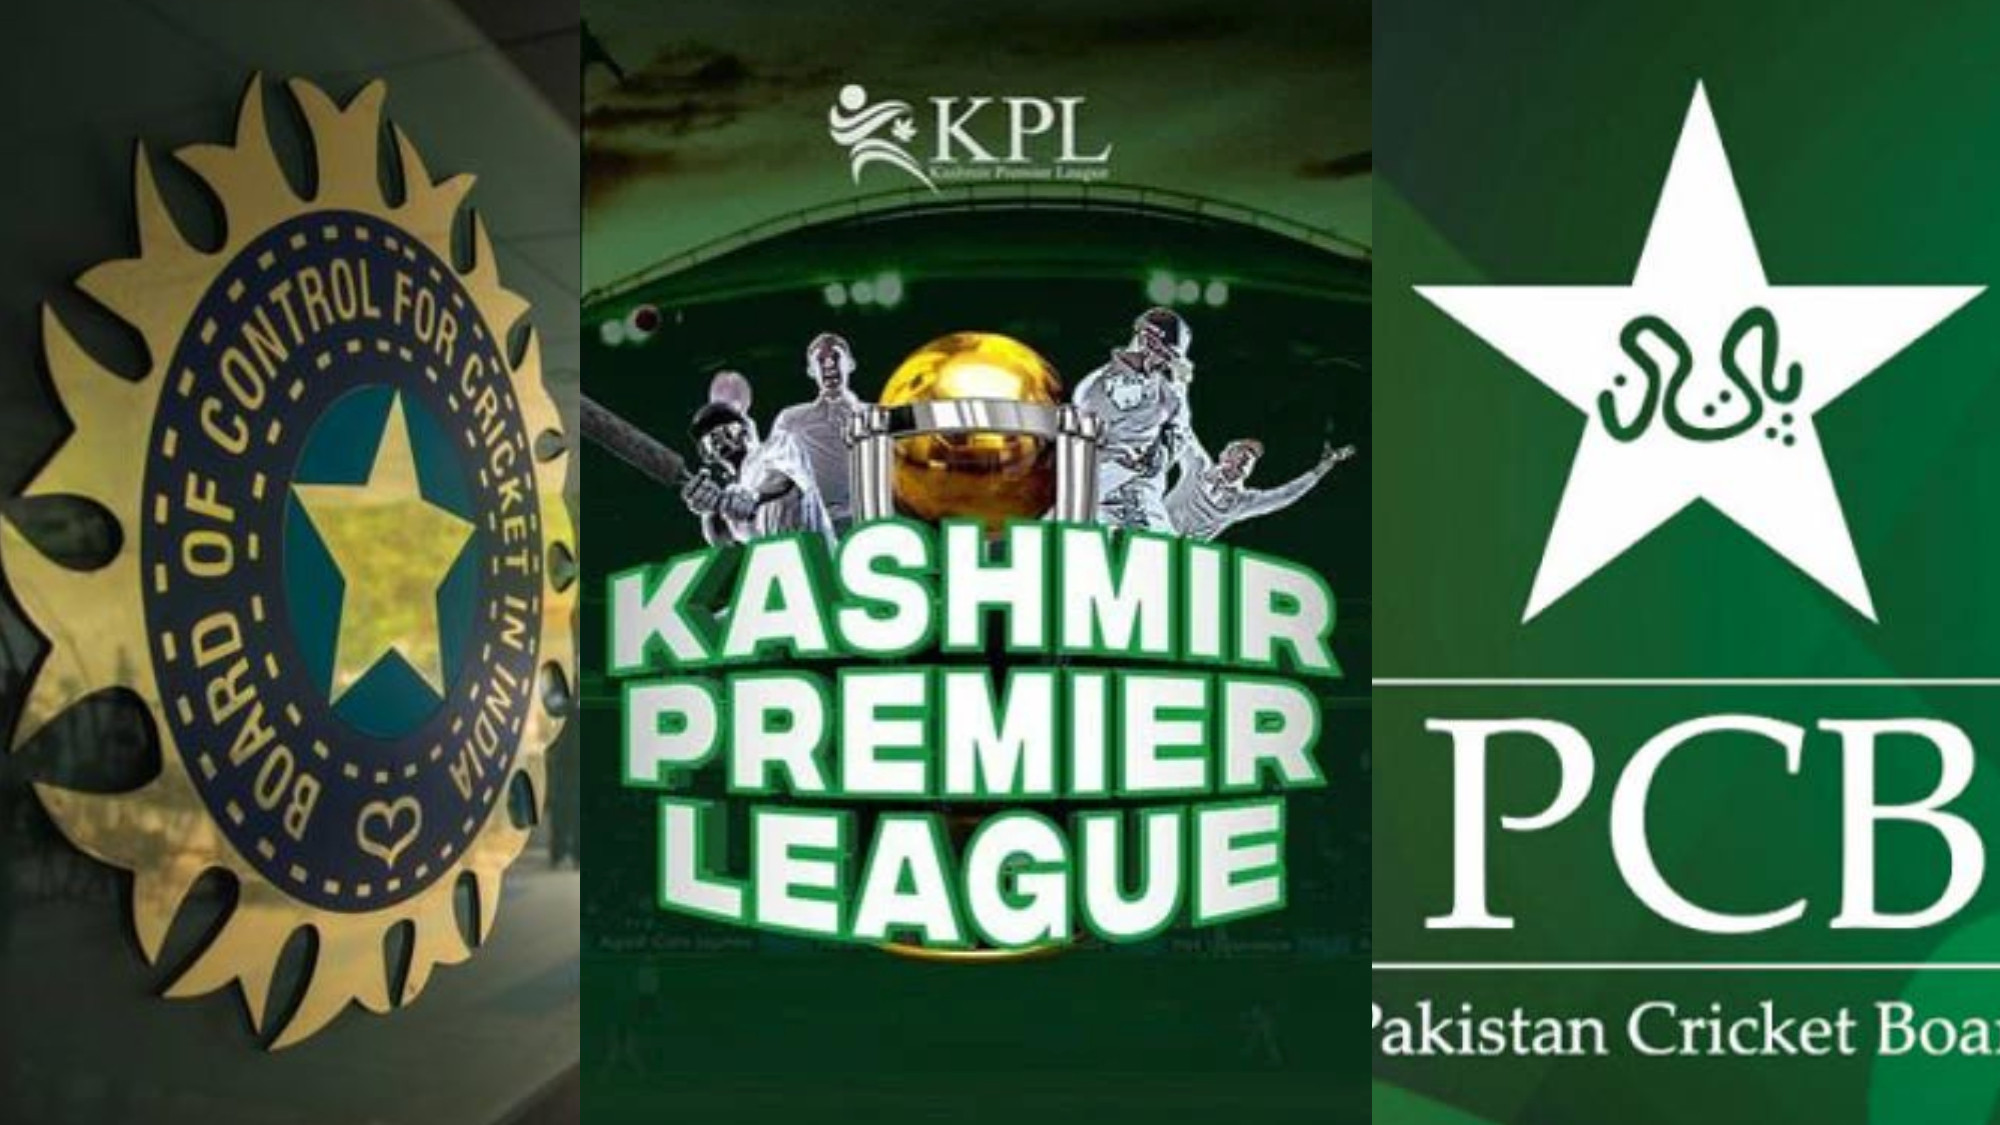 Where’s the debate on Kashmir Premier League? Board has made its stand clear, says BCCI official- Report